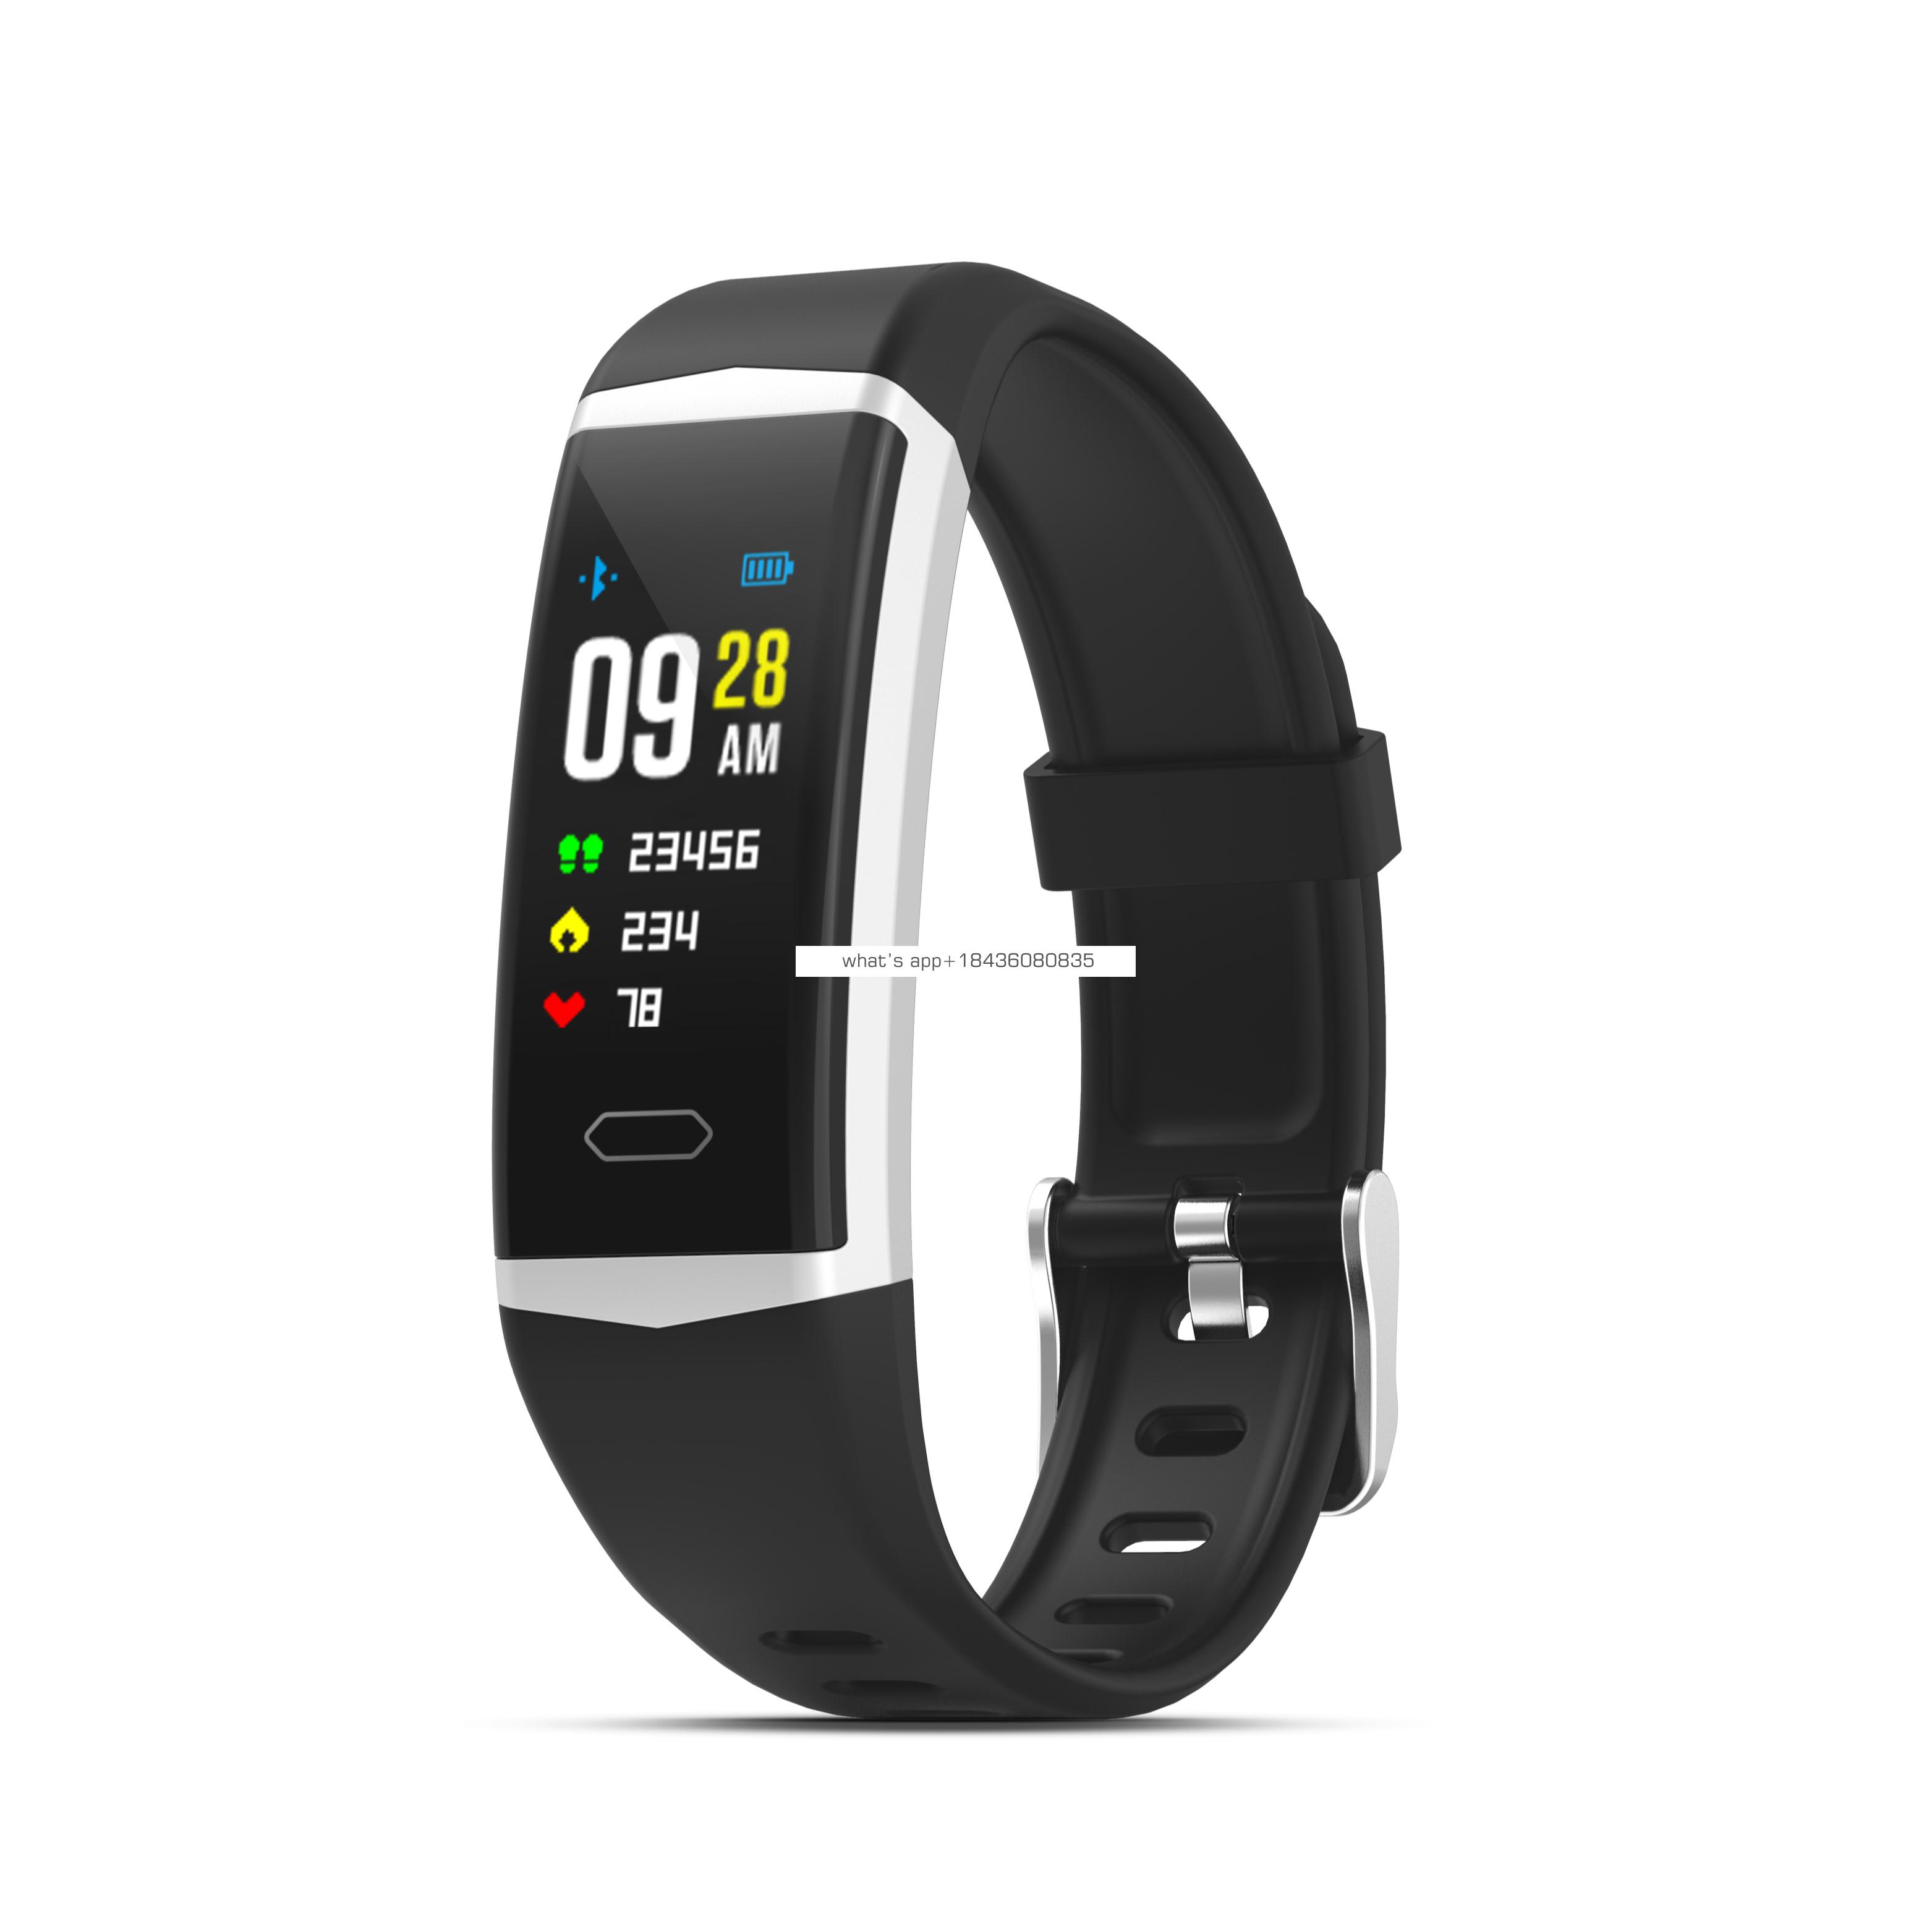 OEM  smart bracelet with dynamic heart rate monitor blood pressure changeable watch face and straps